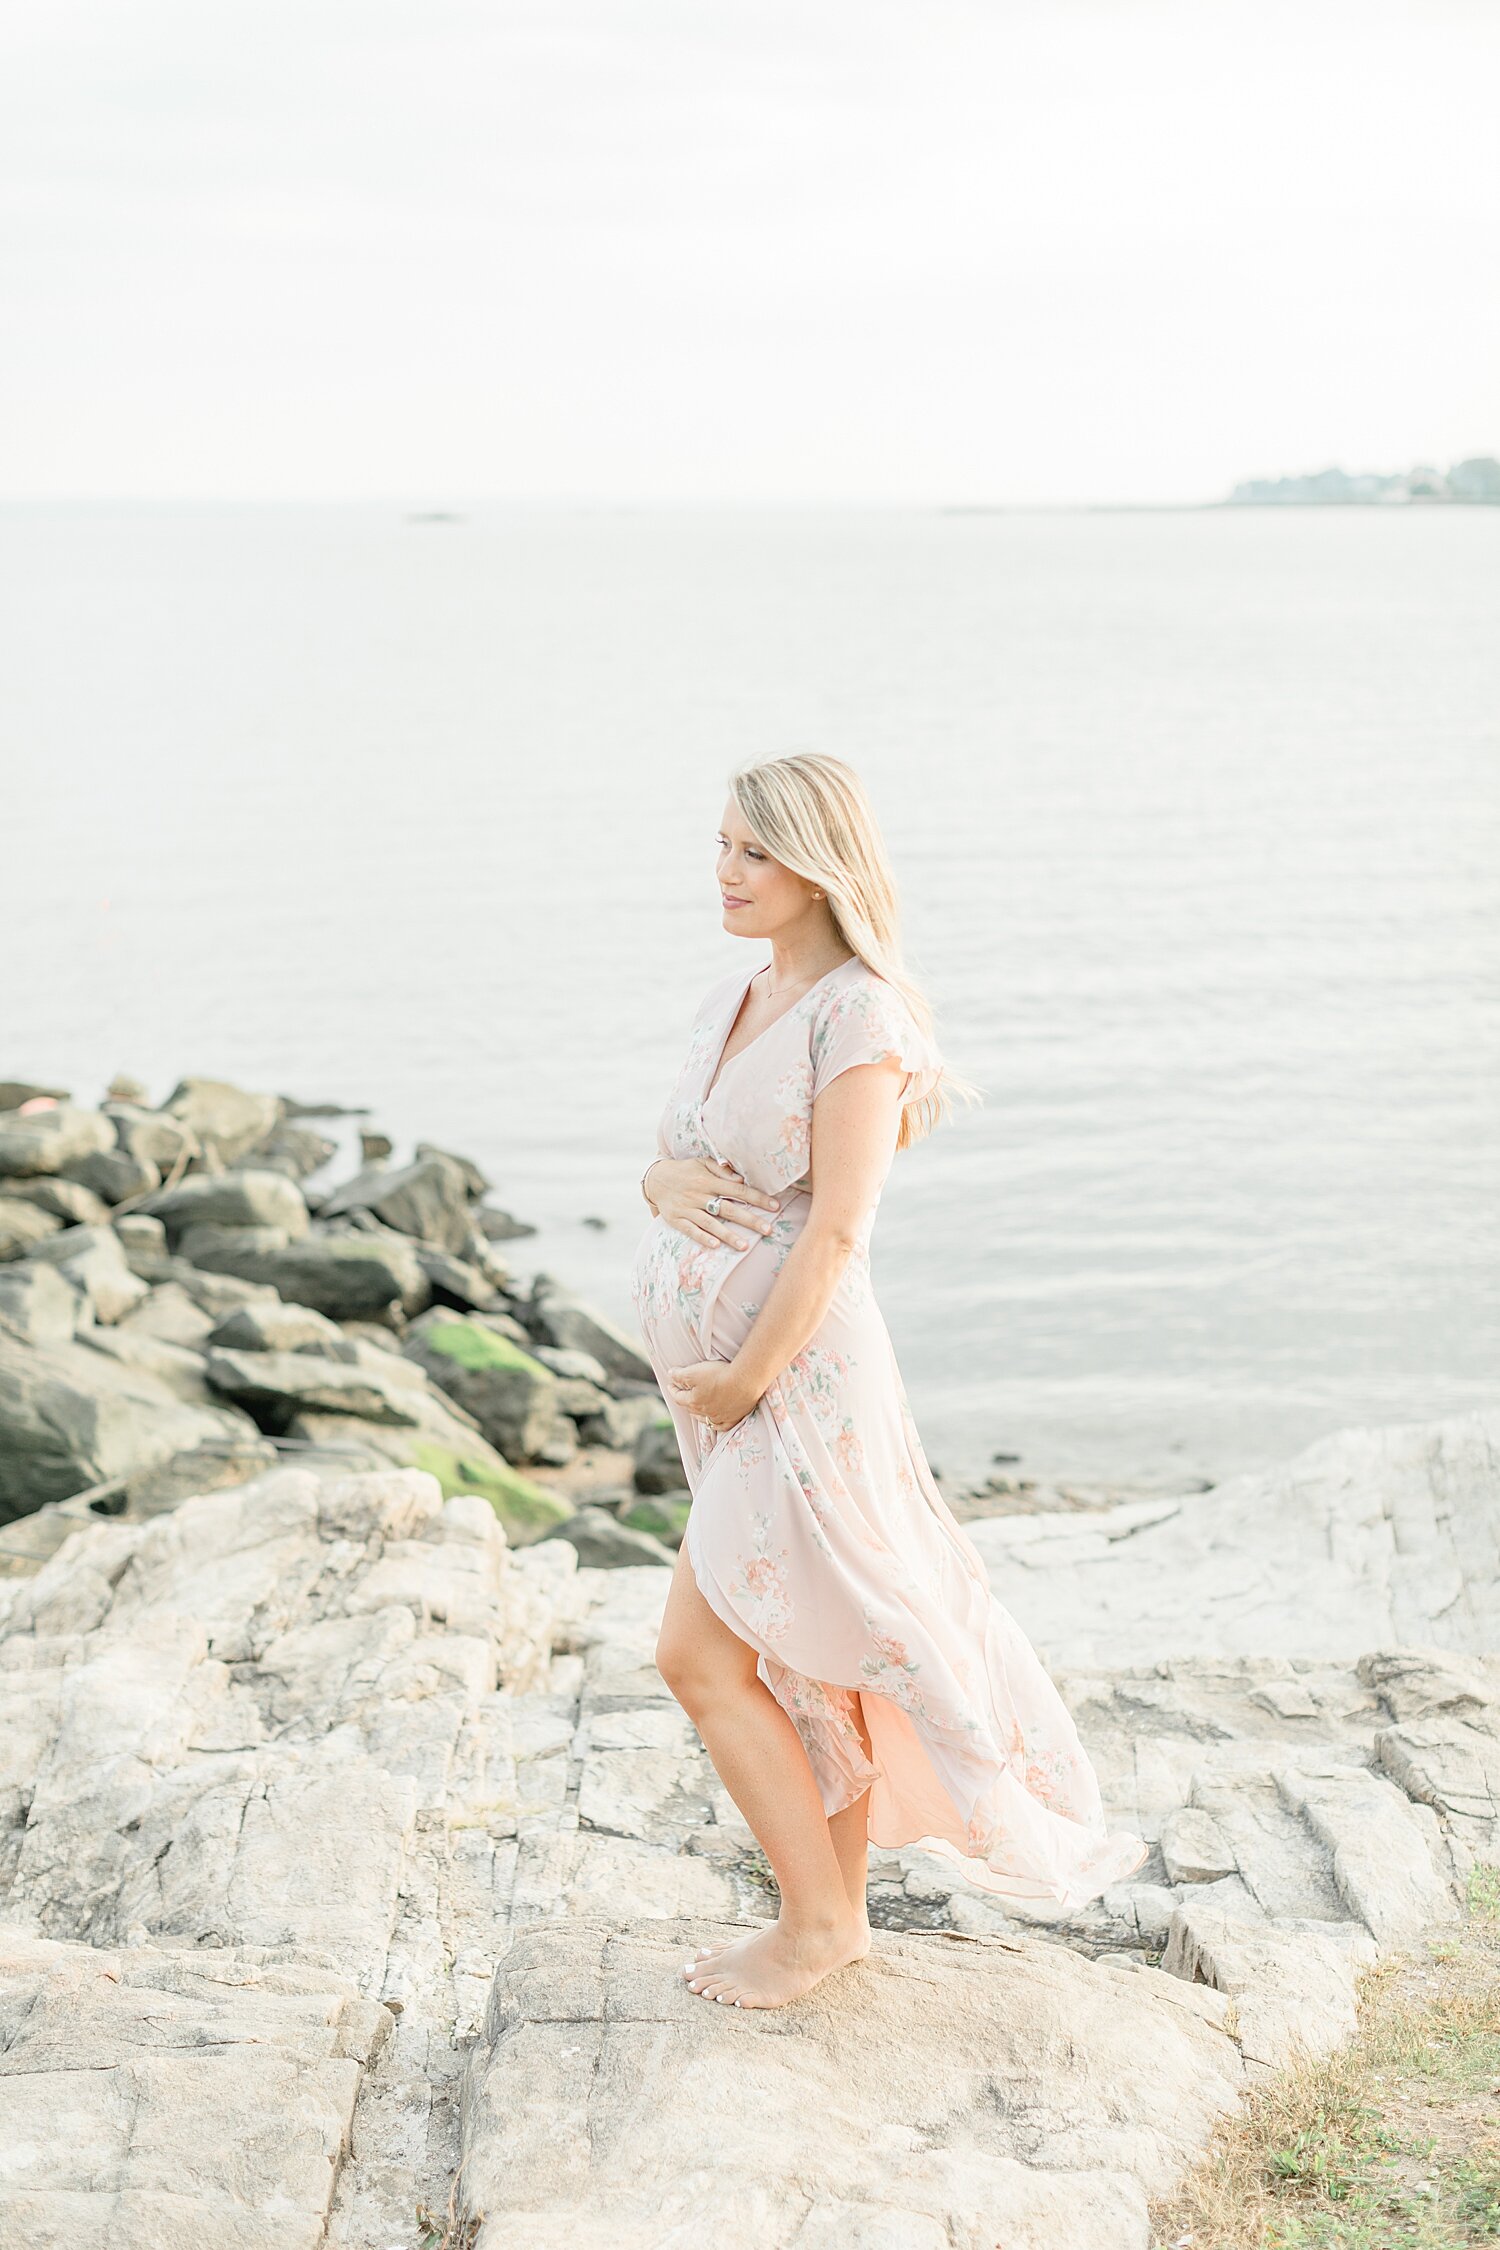 Mama on the rocks at Weed Beach in Darien, CT during maternity photoshoot with Kristin Wood Photography.